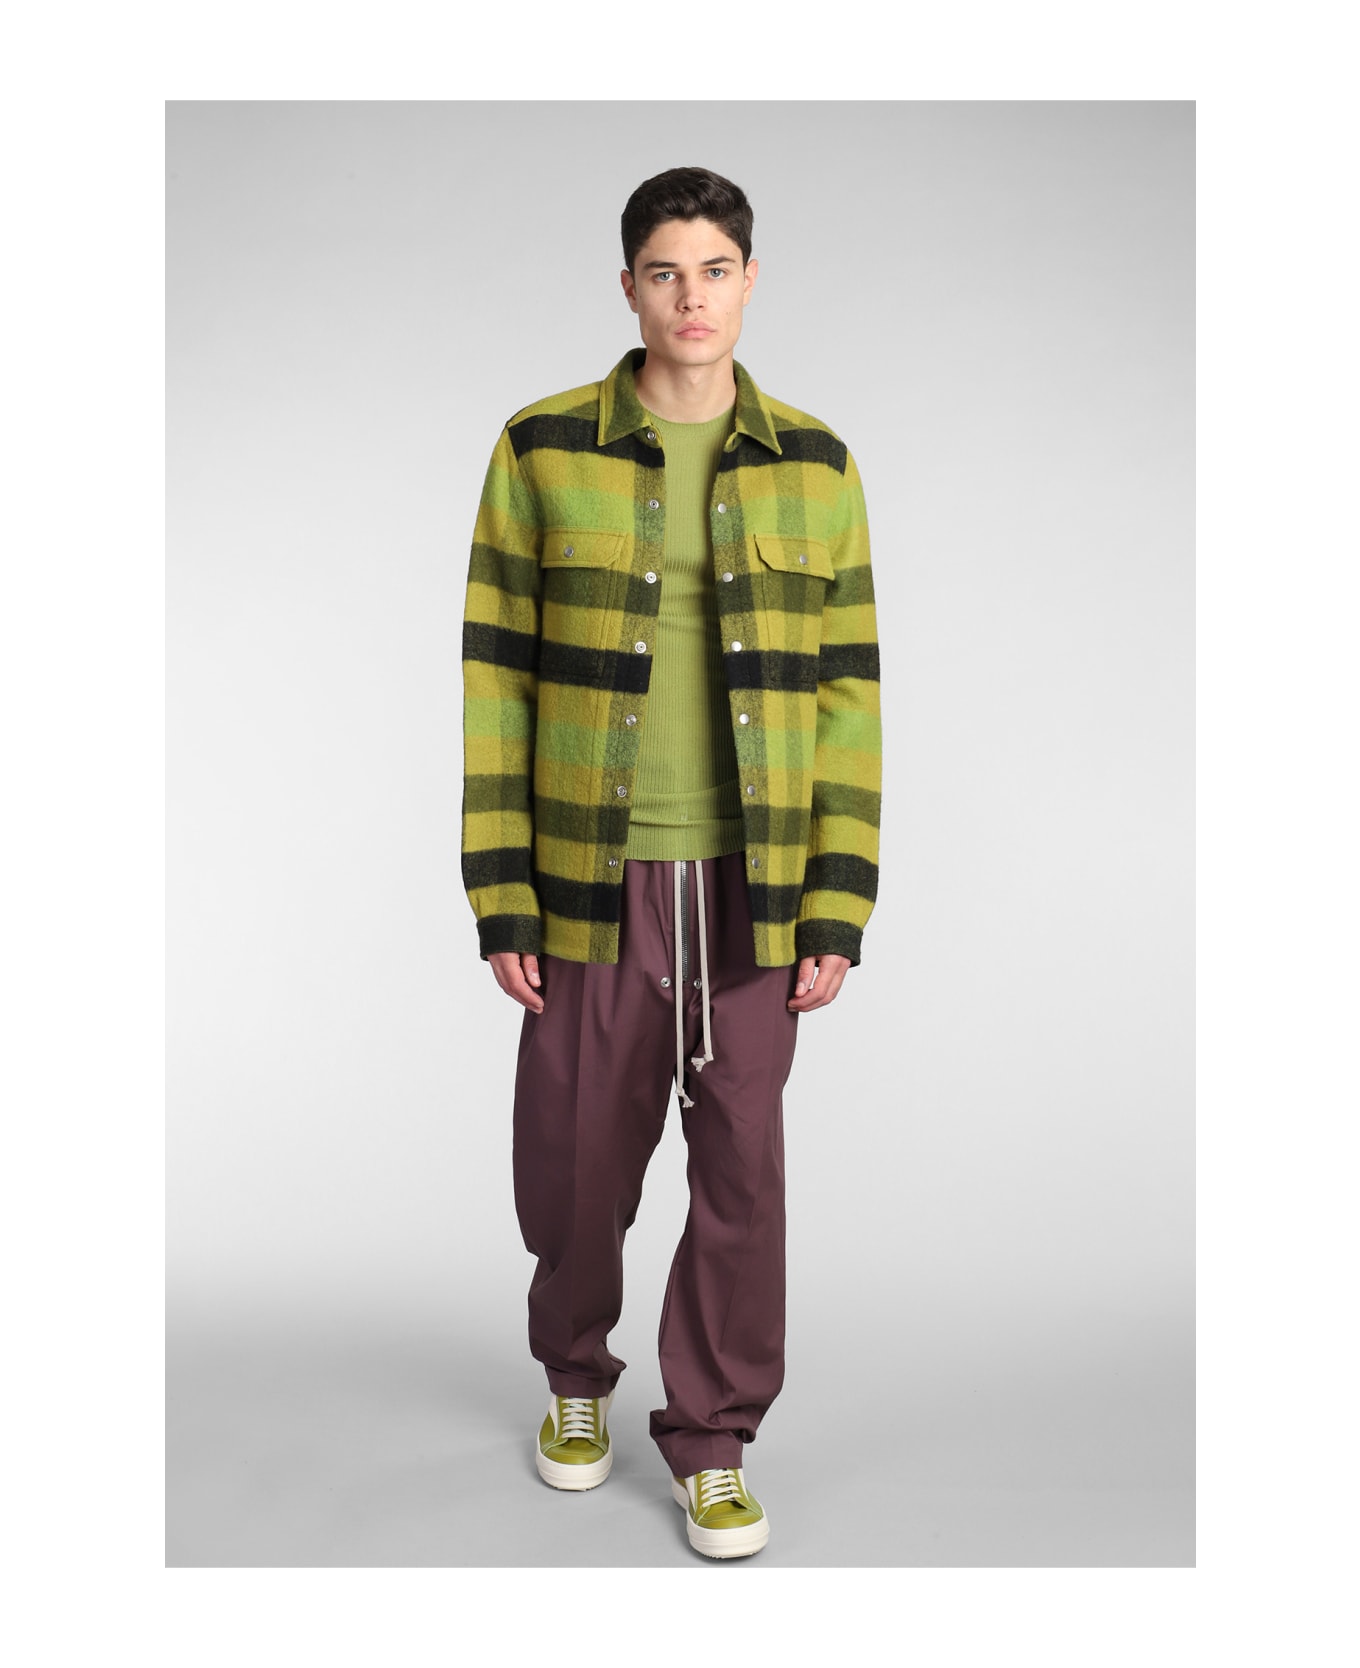 Rick Owens Ribbed Round Knitwear In Green Wool - green